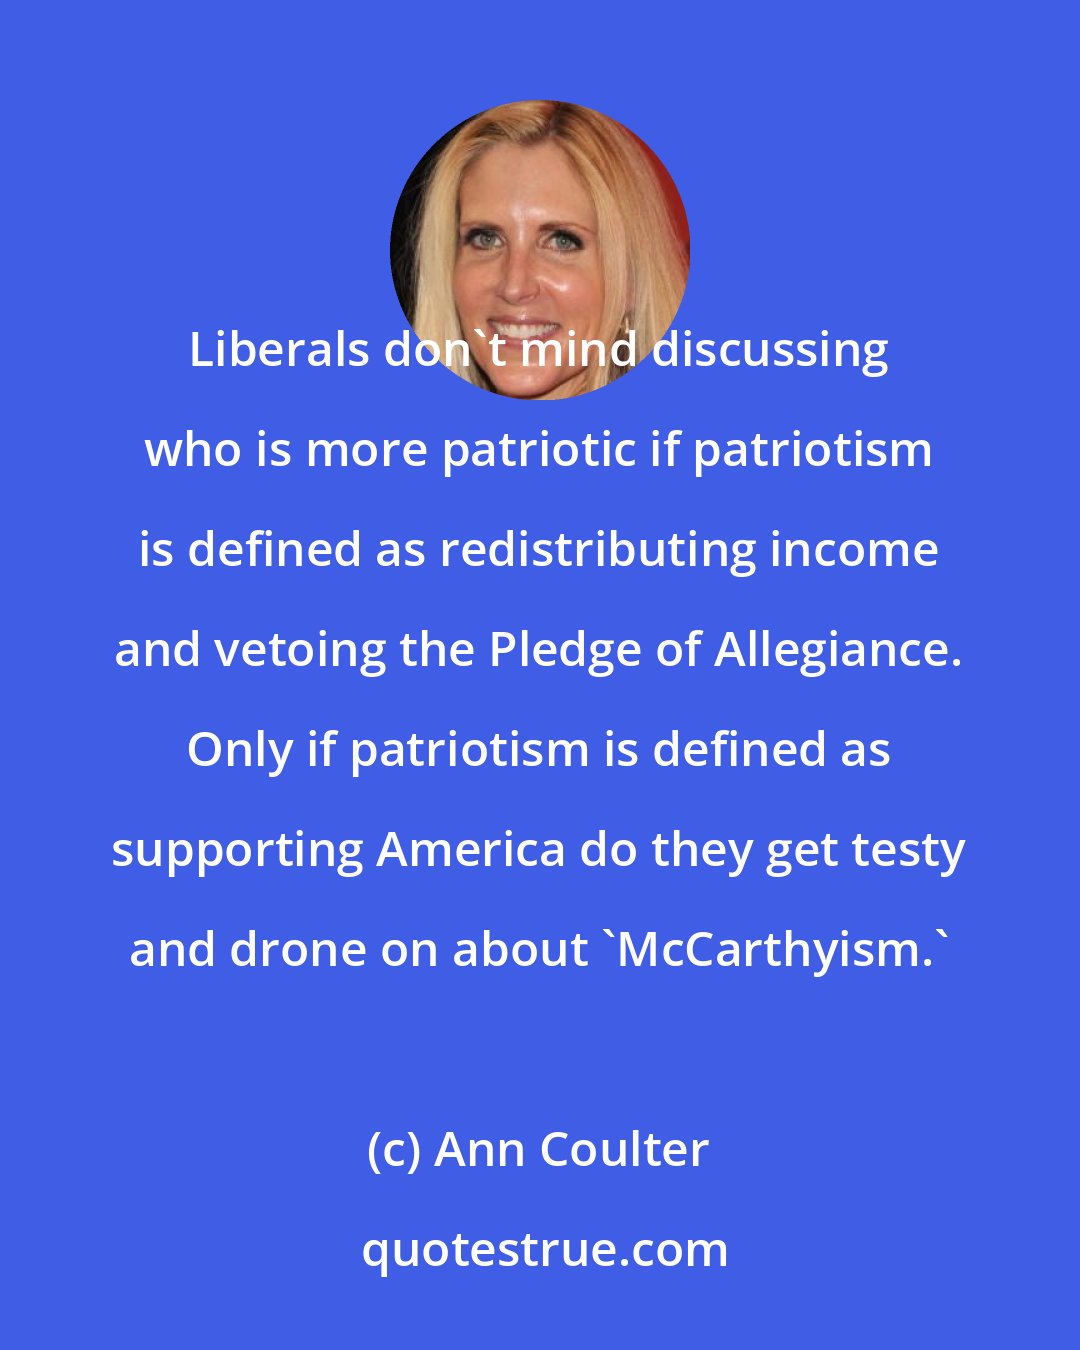 Ann Coulter: Liberals don't mind discussing who is more patriotic if patriotism is defined as redistributing income and vetoing the Pledge of Allegiance. Only if patriotism is defined as supporting America do they get testy and drone on about 'McCarthyism.'